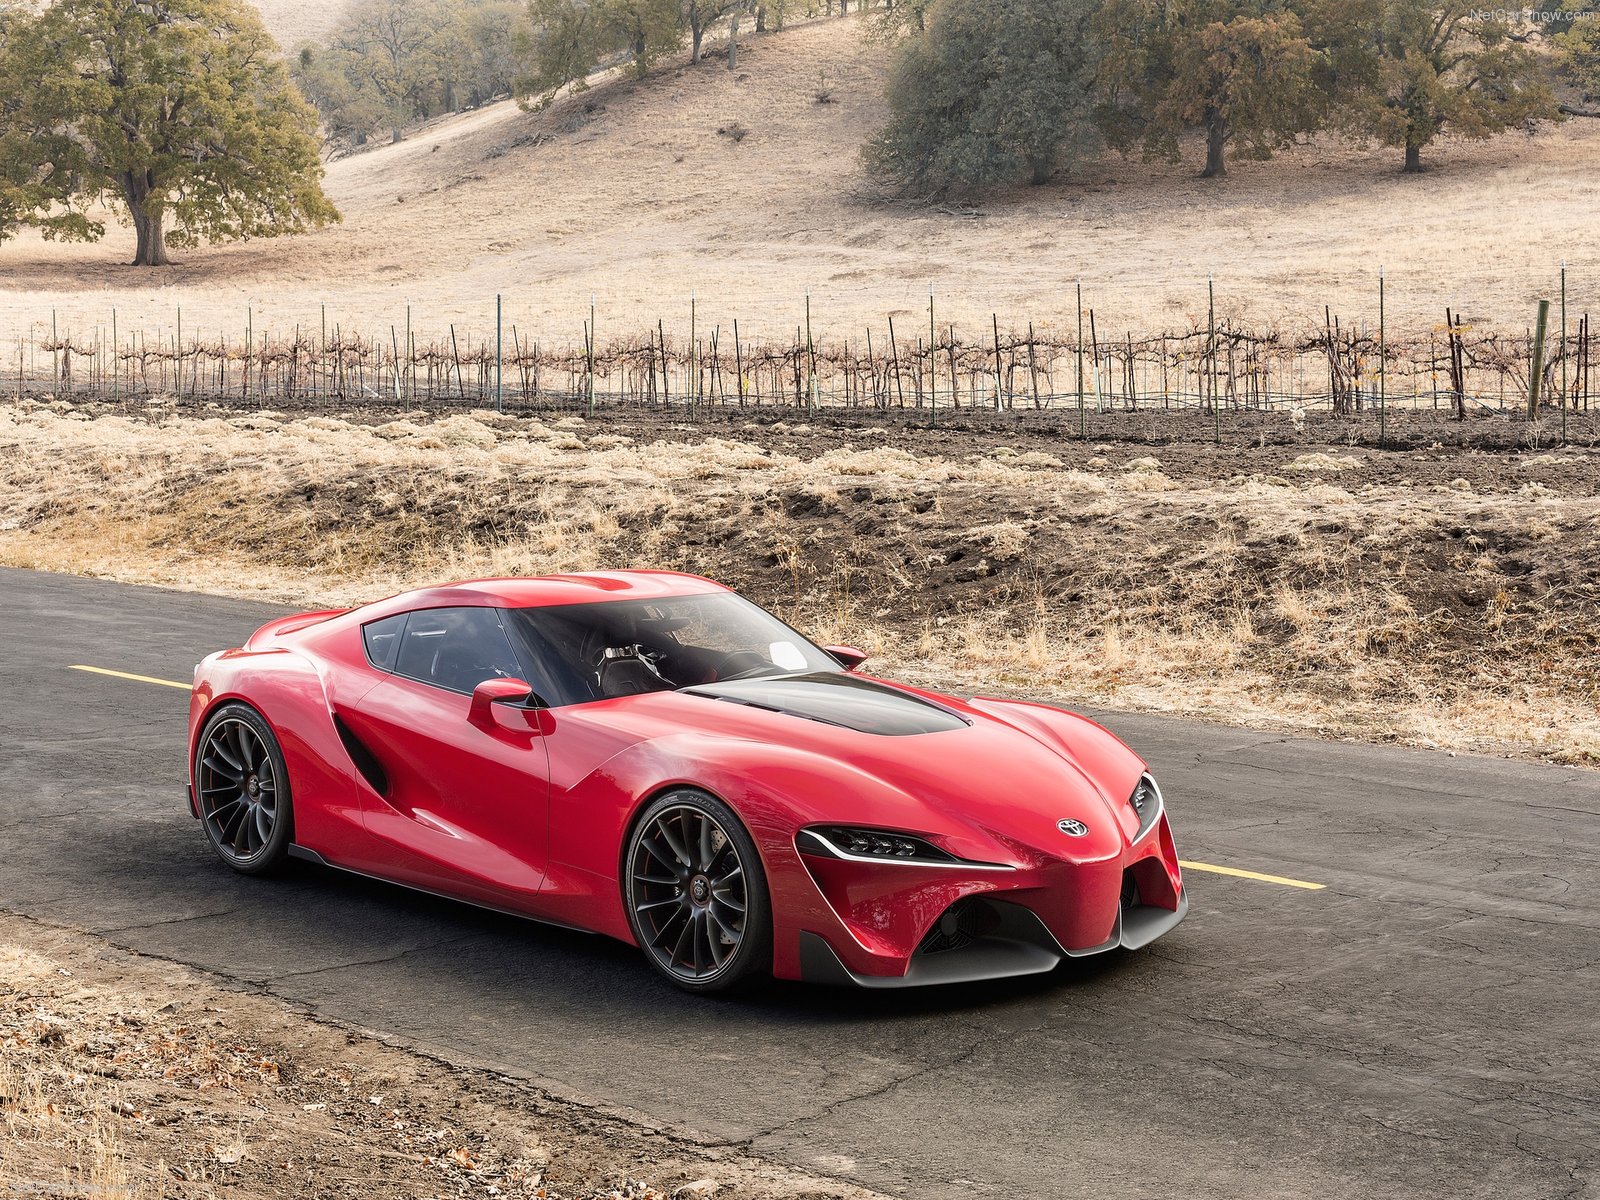 NFS - Need for Speed - Toyota FT-1 Concept